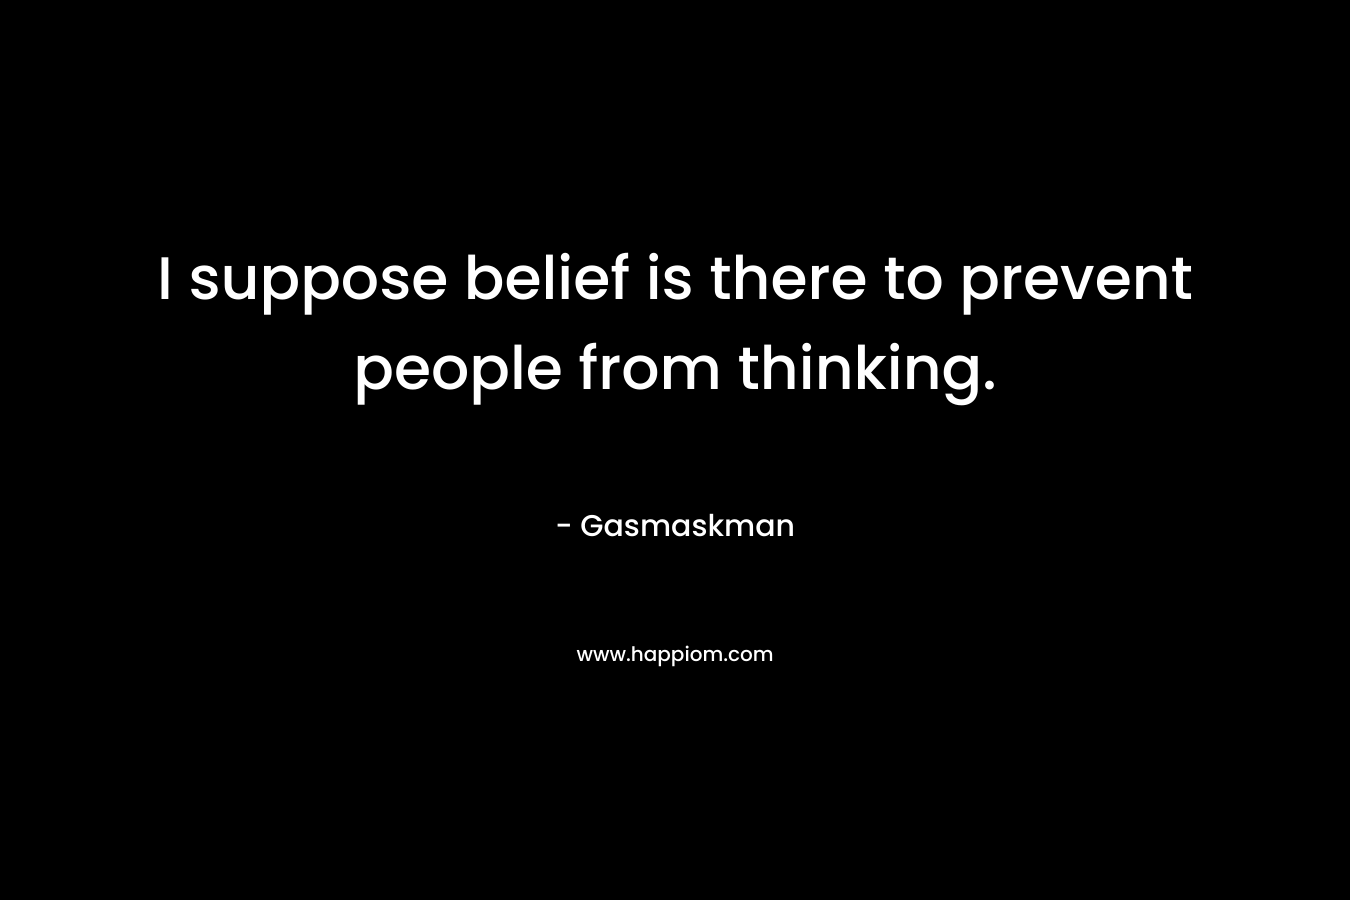 I suppose belief is there to prevent people from thinking.